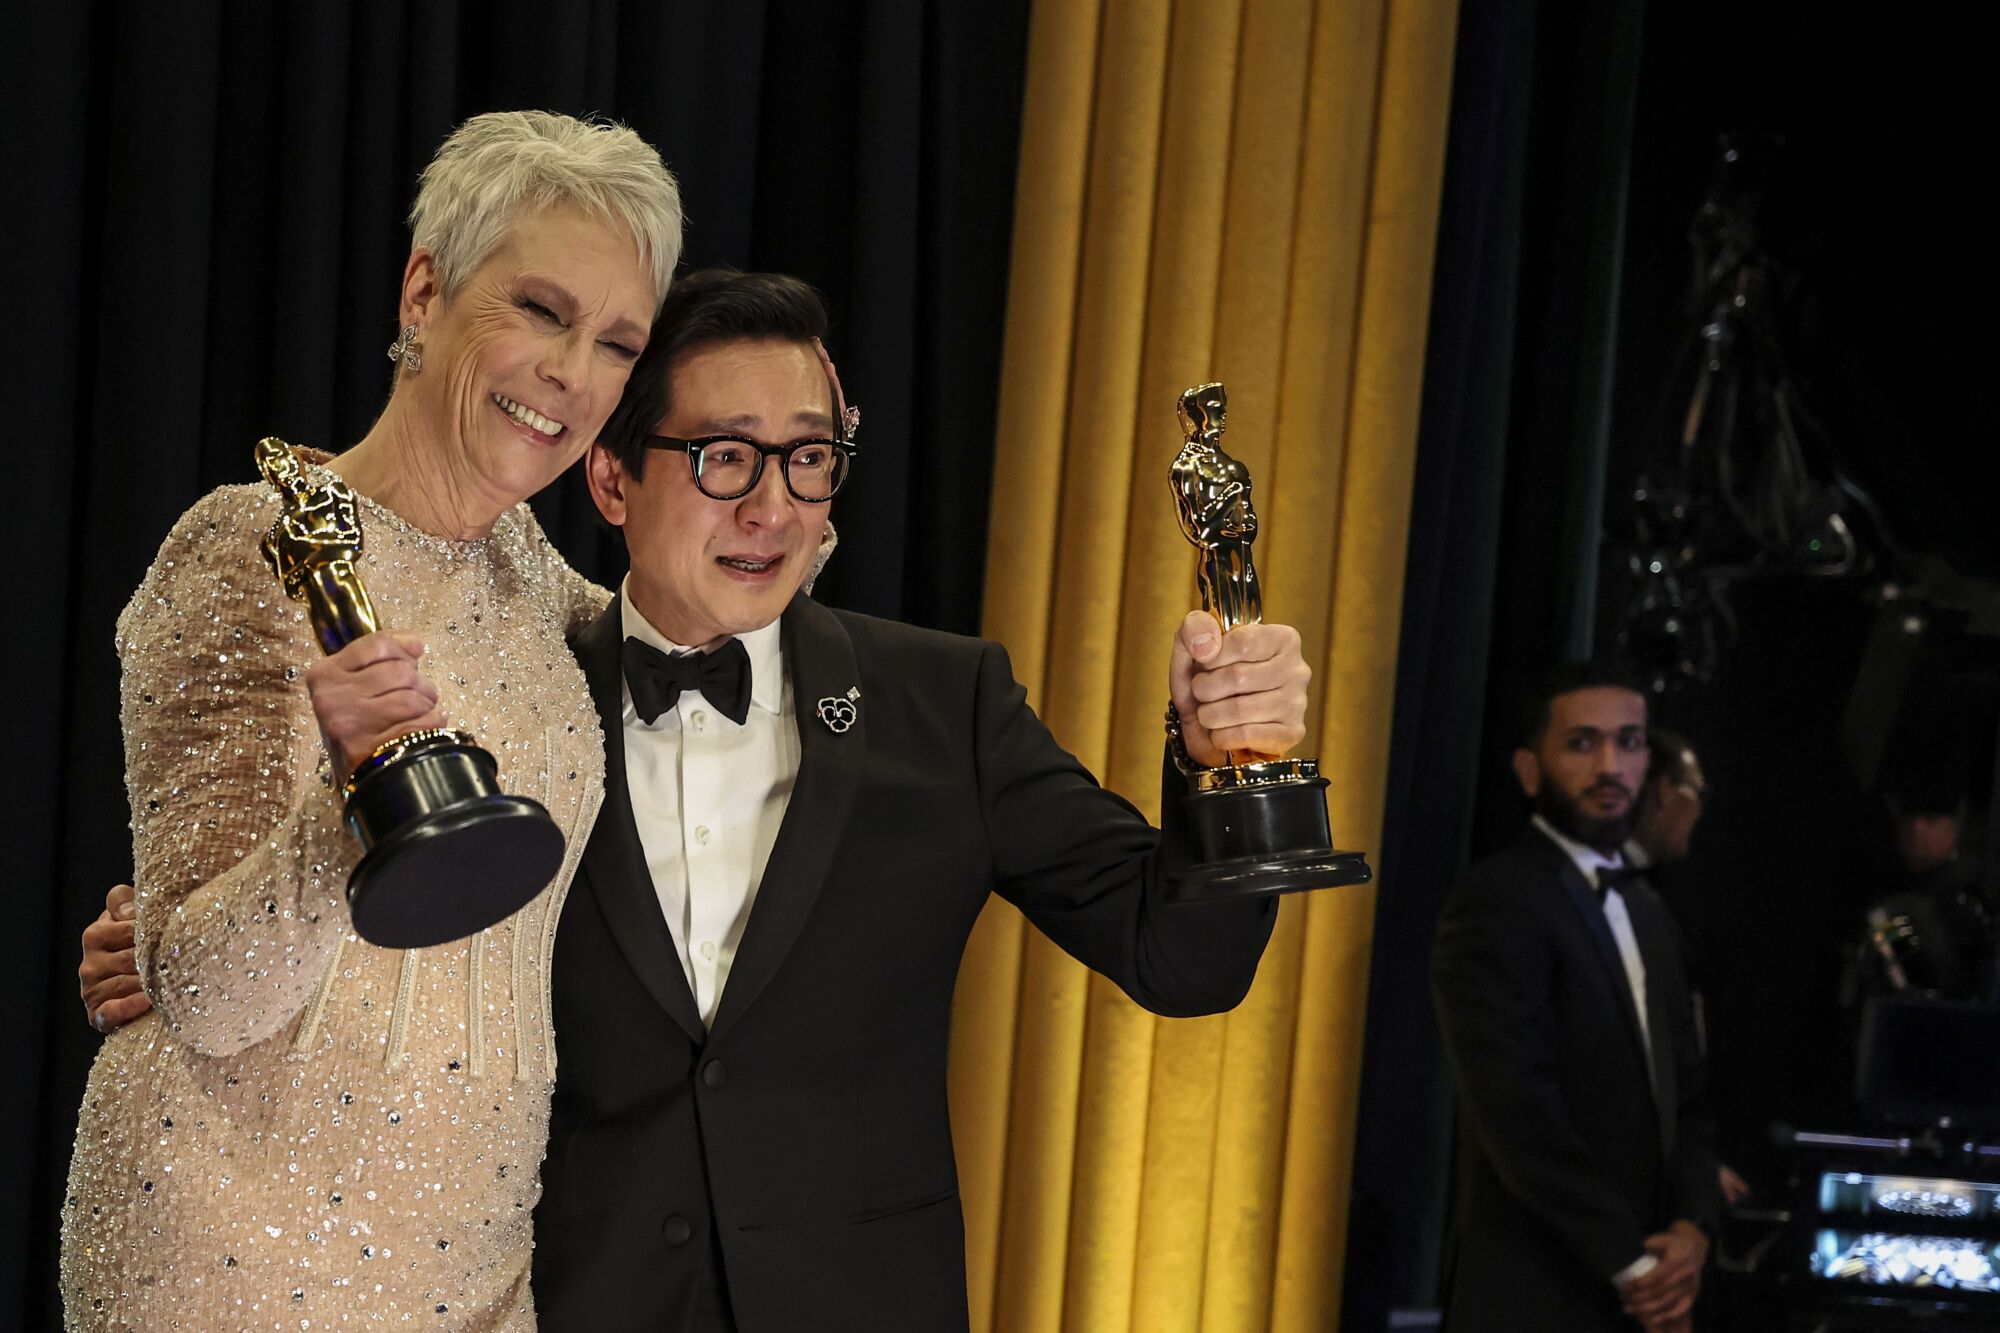 Woman in champagne dress and man in tuxedo both hold up Oscars 